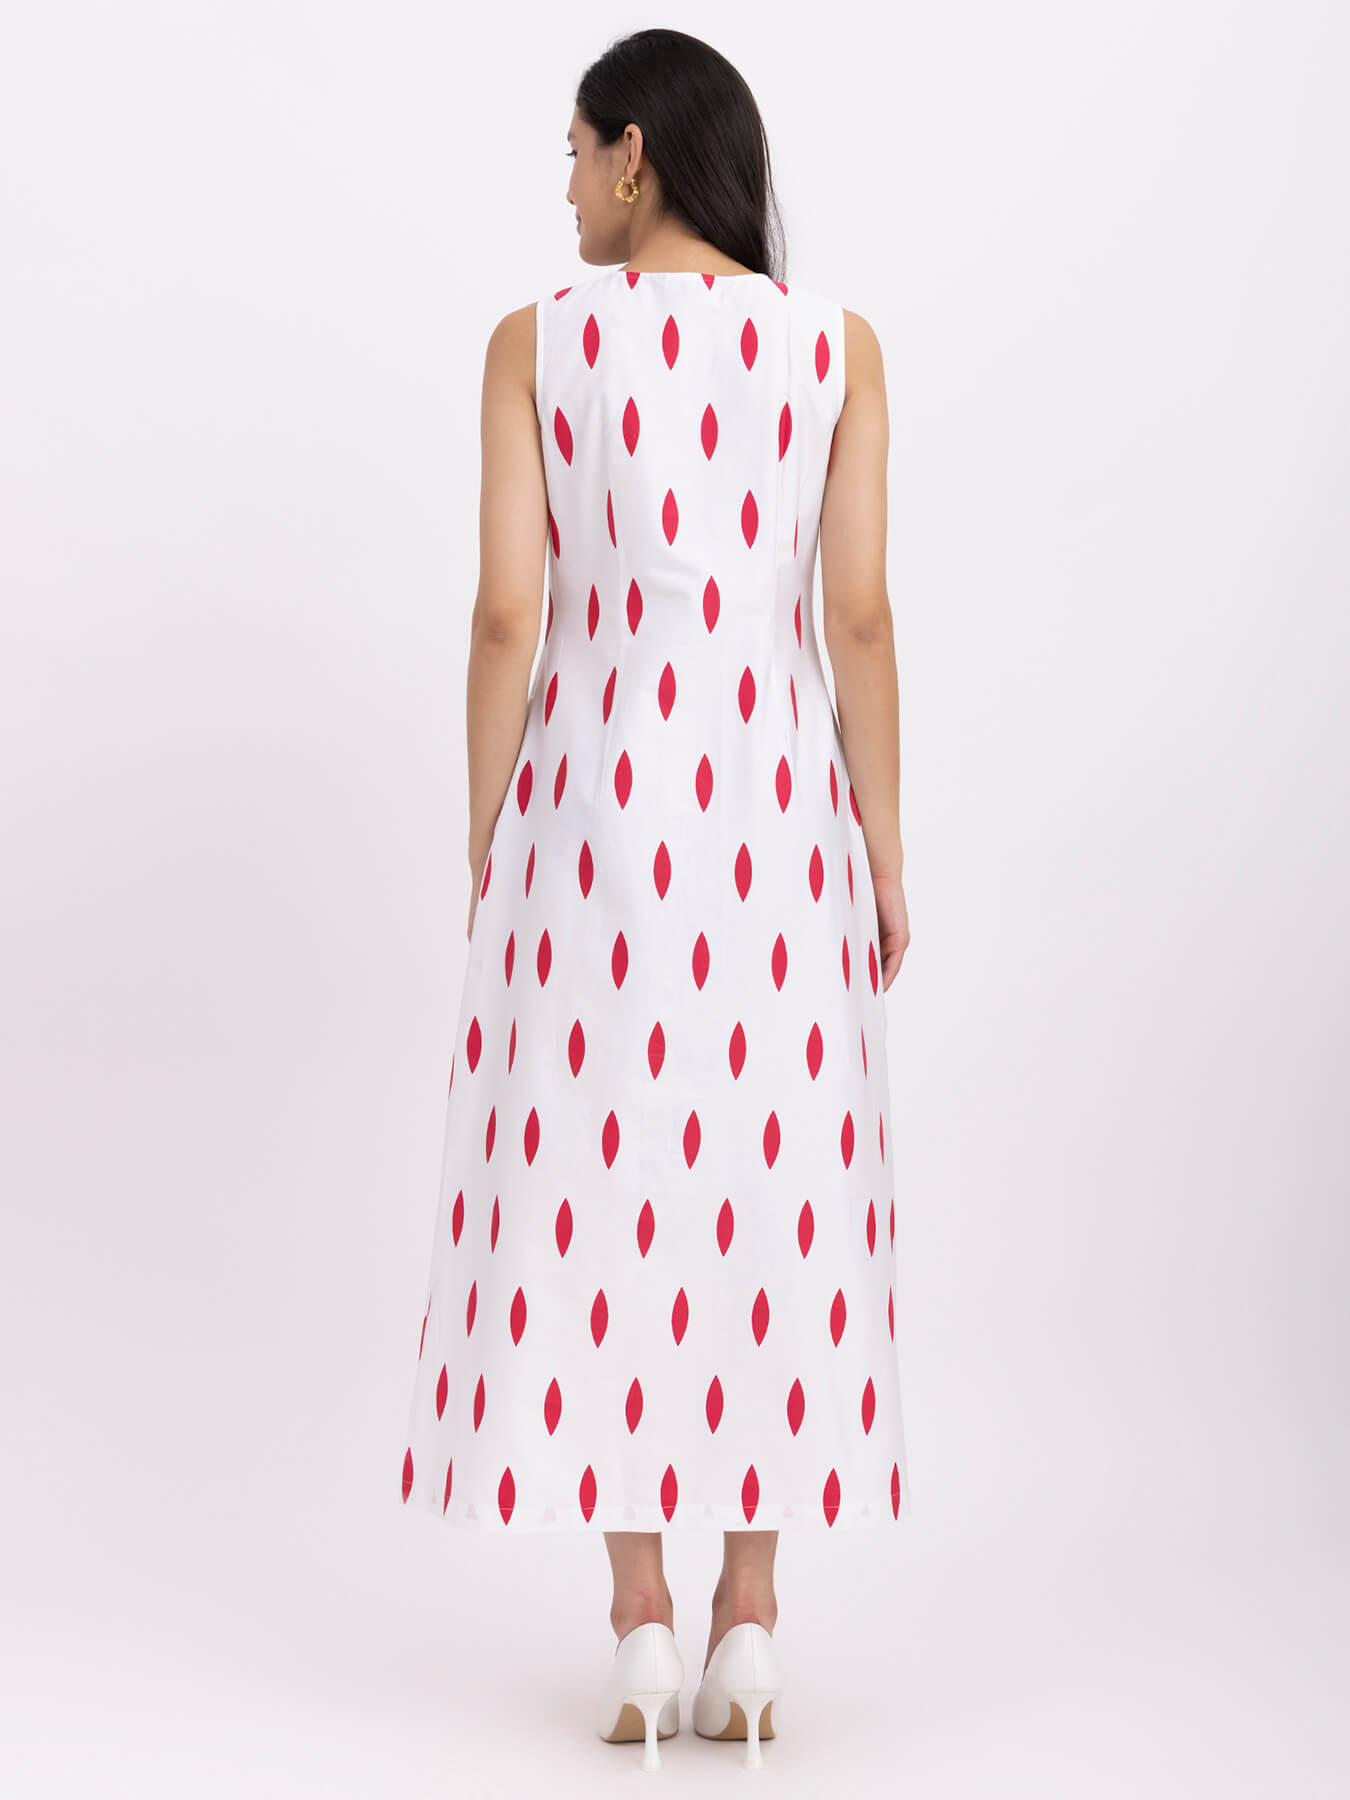 Cotton Geometric Print Dress - White And Red